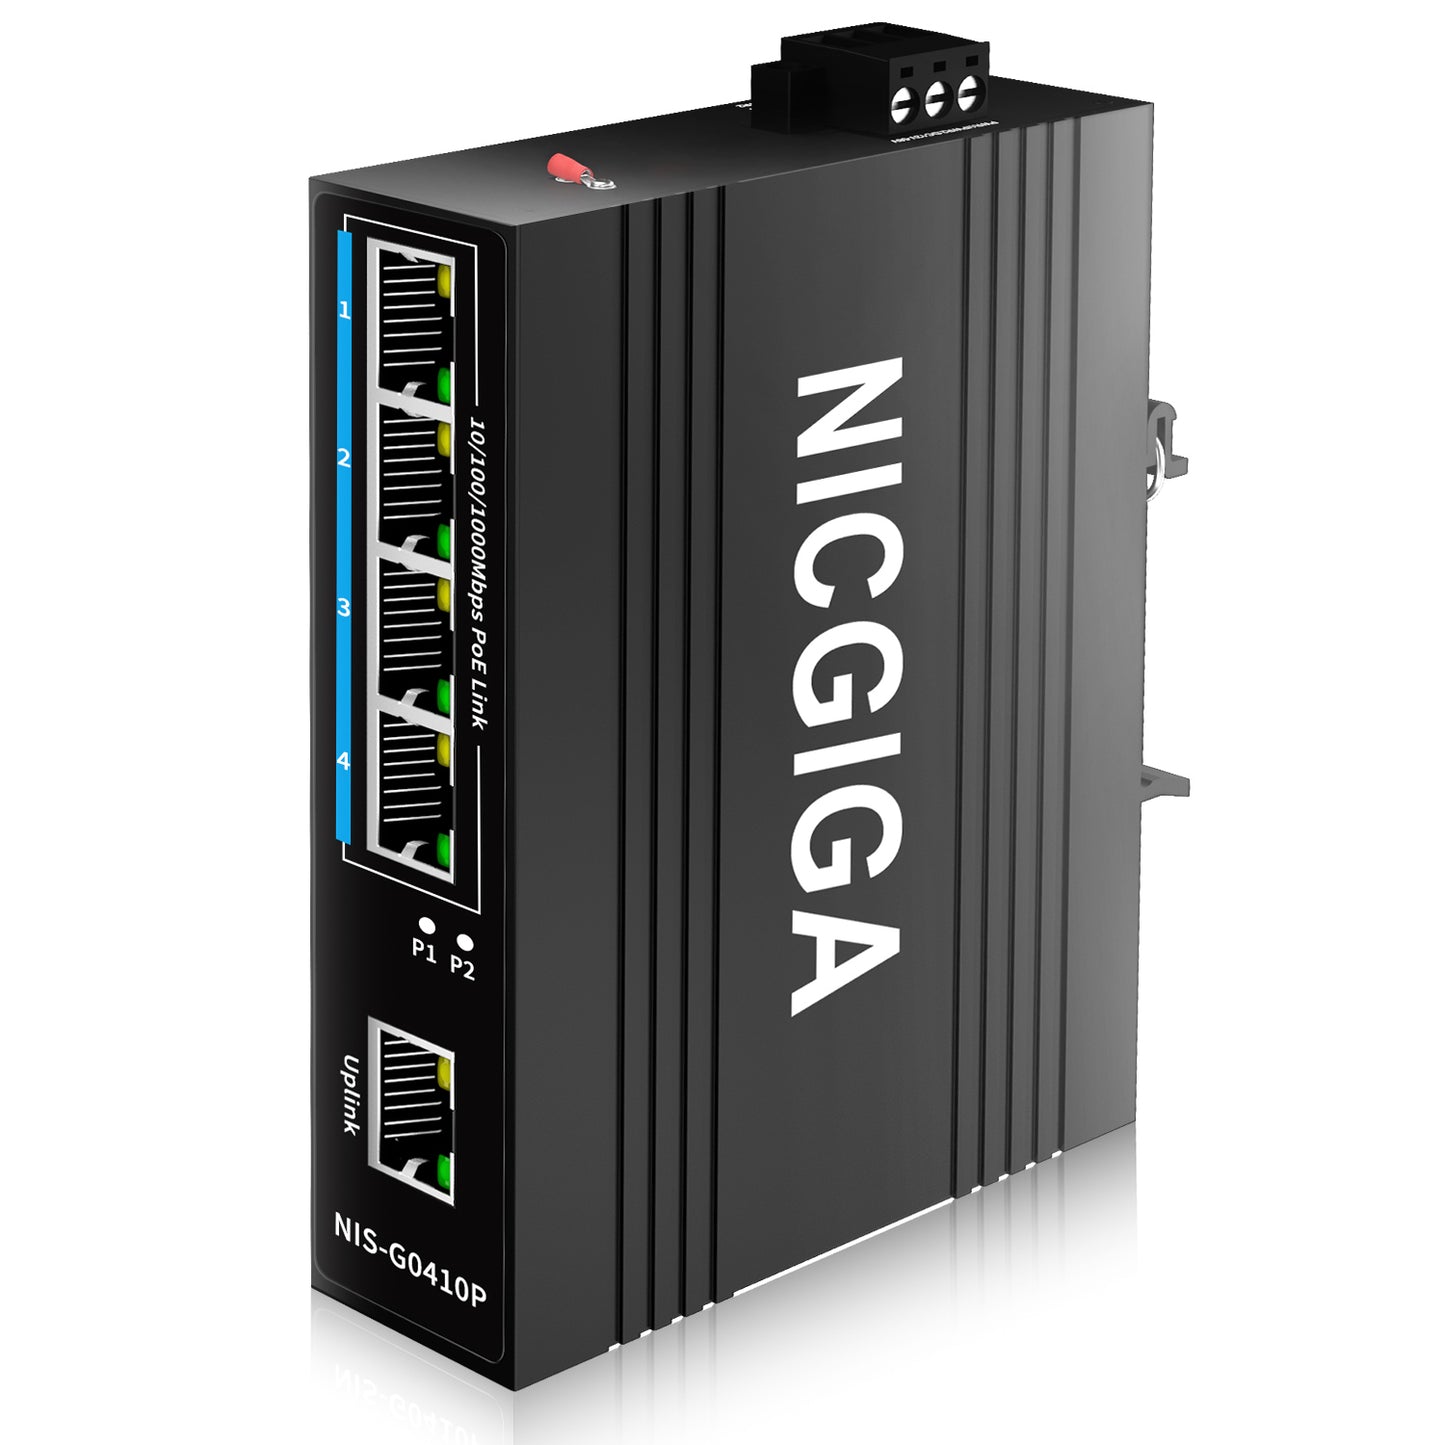 NICGIGA 5 Port Industrial Gigabit PoE Switch, with 4 x IEEE802.3af/at 30W PoE Ports @125W. IP40 Metal Enclosure, DIN-Rail, Compact PoE Power for Solar Power/RV Truck/VoIP Systems.